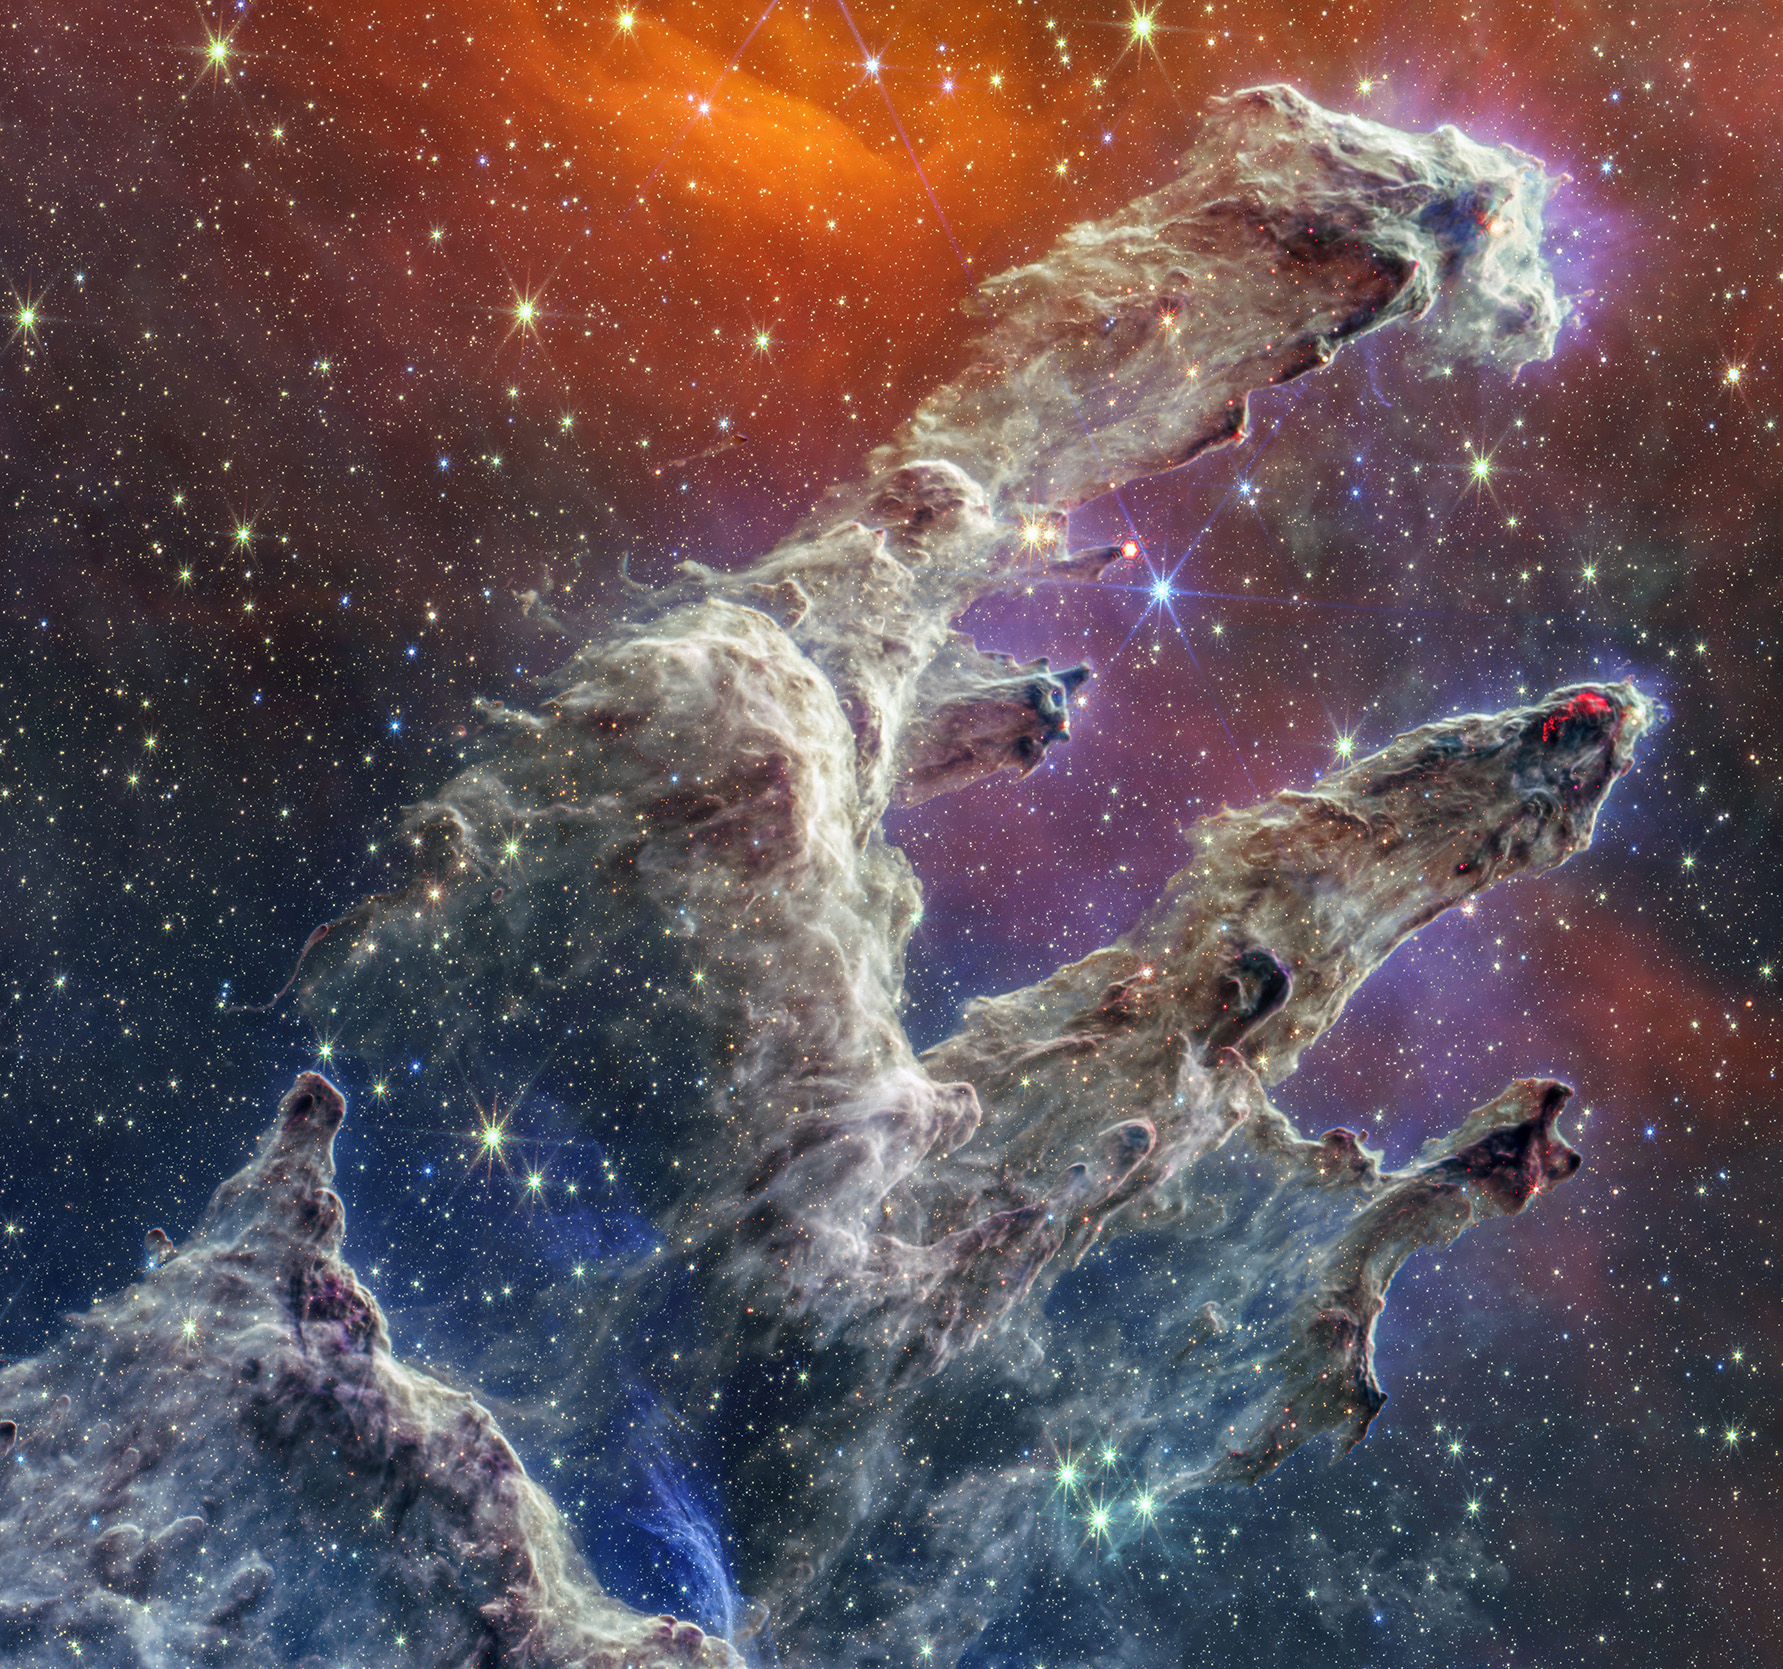 By combining images of the iconic Pillars of Creation from two cameras aboard JWST, the universe has been framed in its infrared glory. Webb’s near-infrared image was fused with its mid-infrared image, setting this star-forming region ablaze with new details.